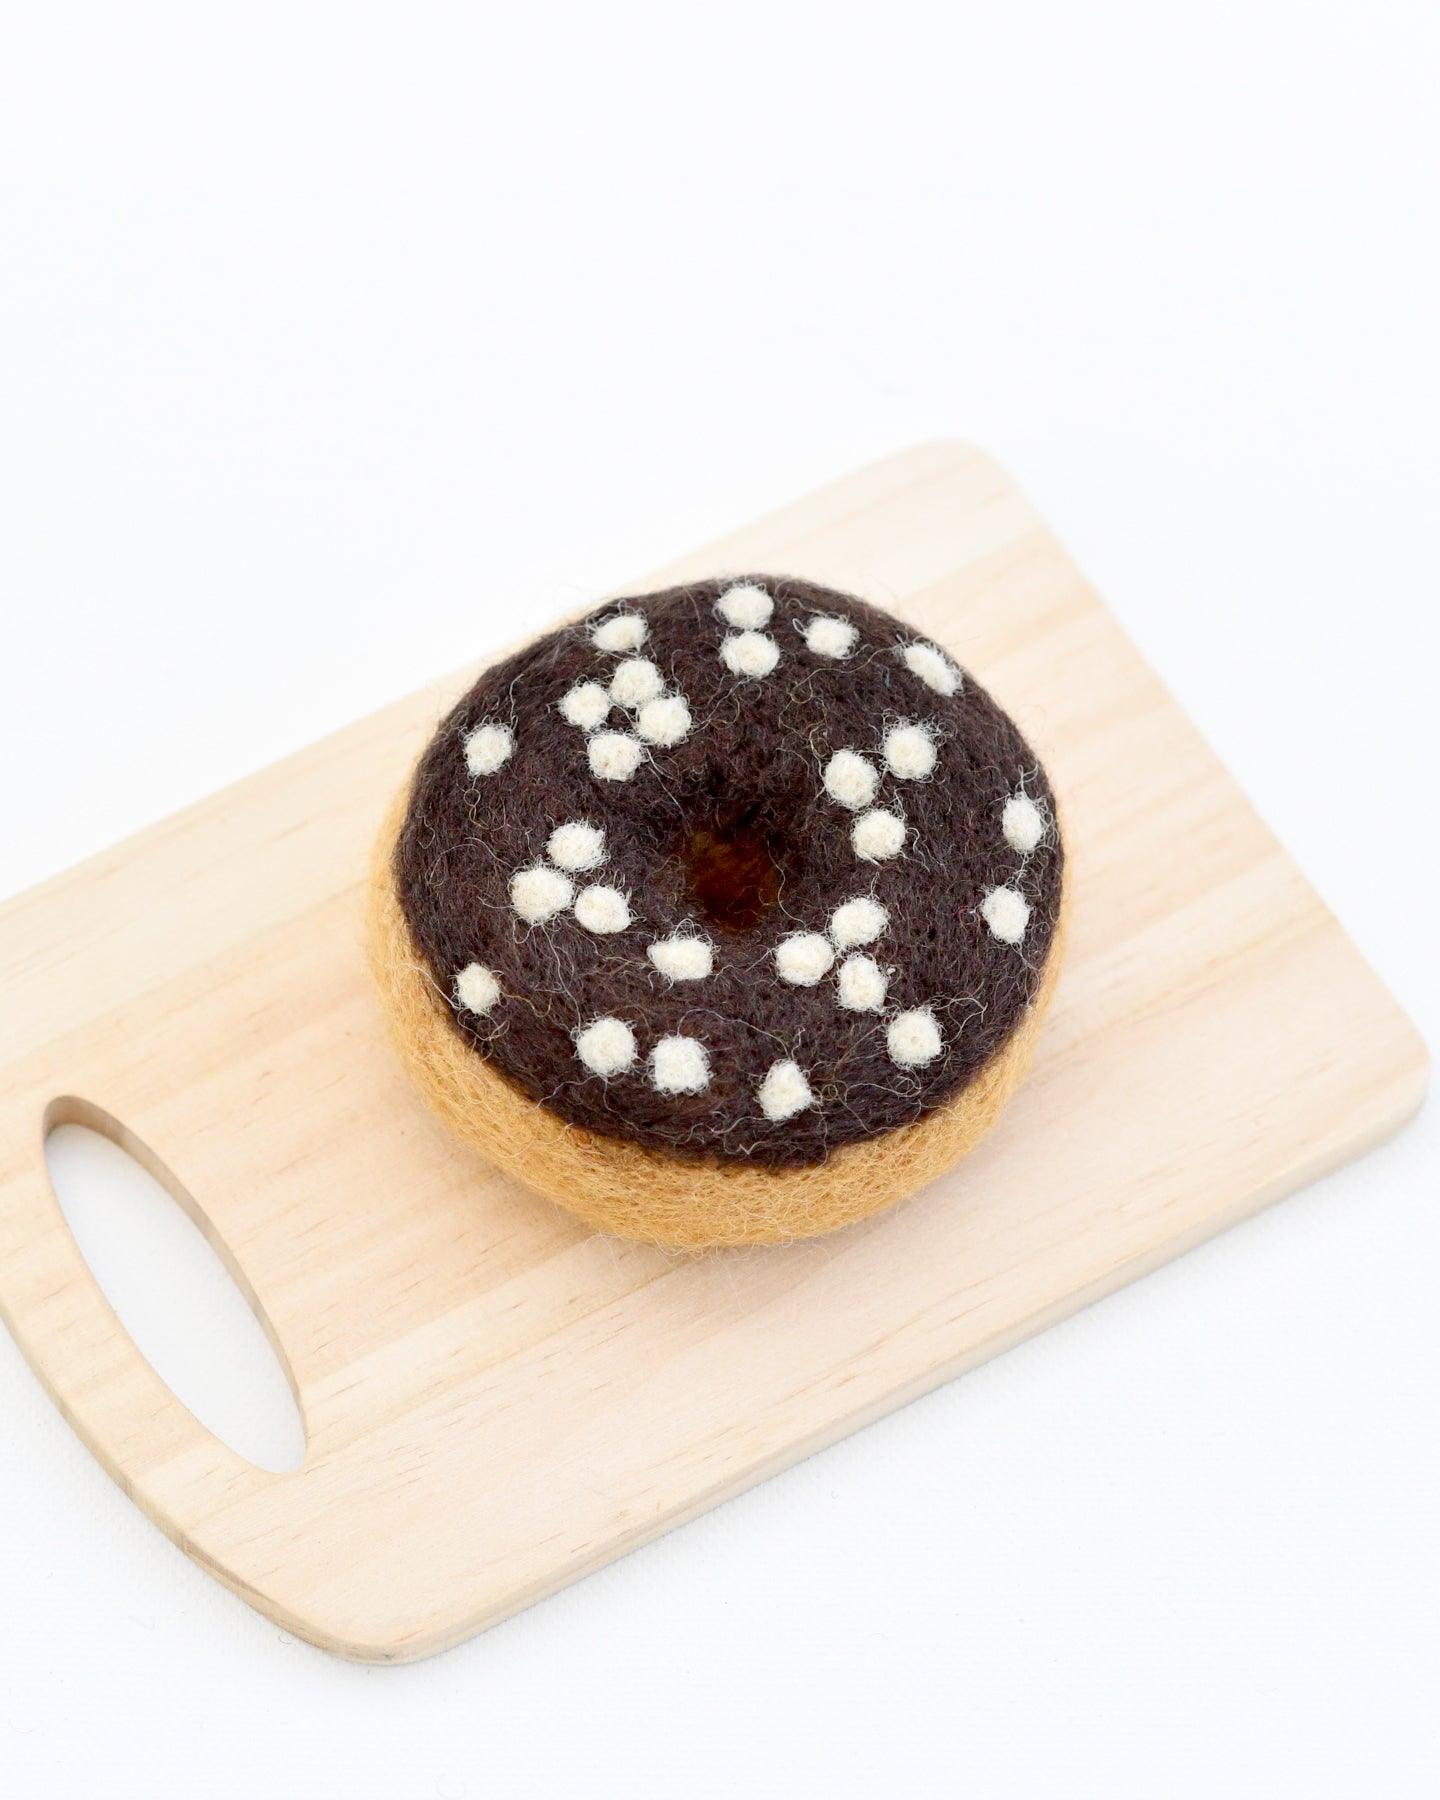 Felt Doughnut (Donut) with Chocolate Frosting and Nuts